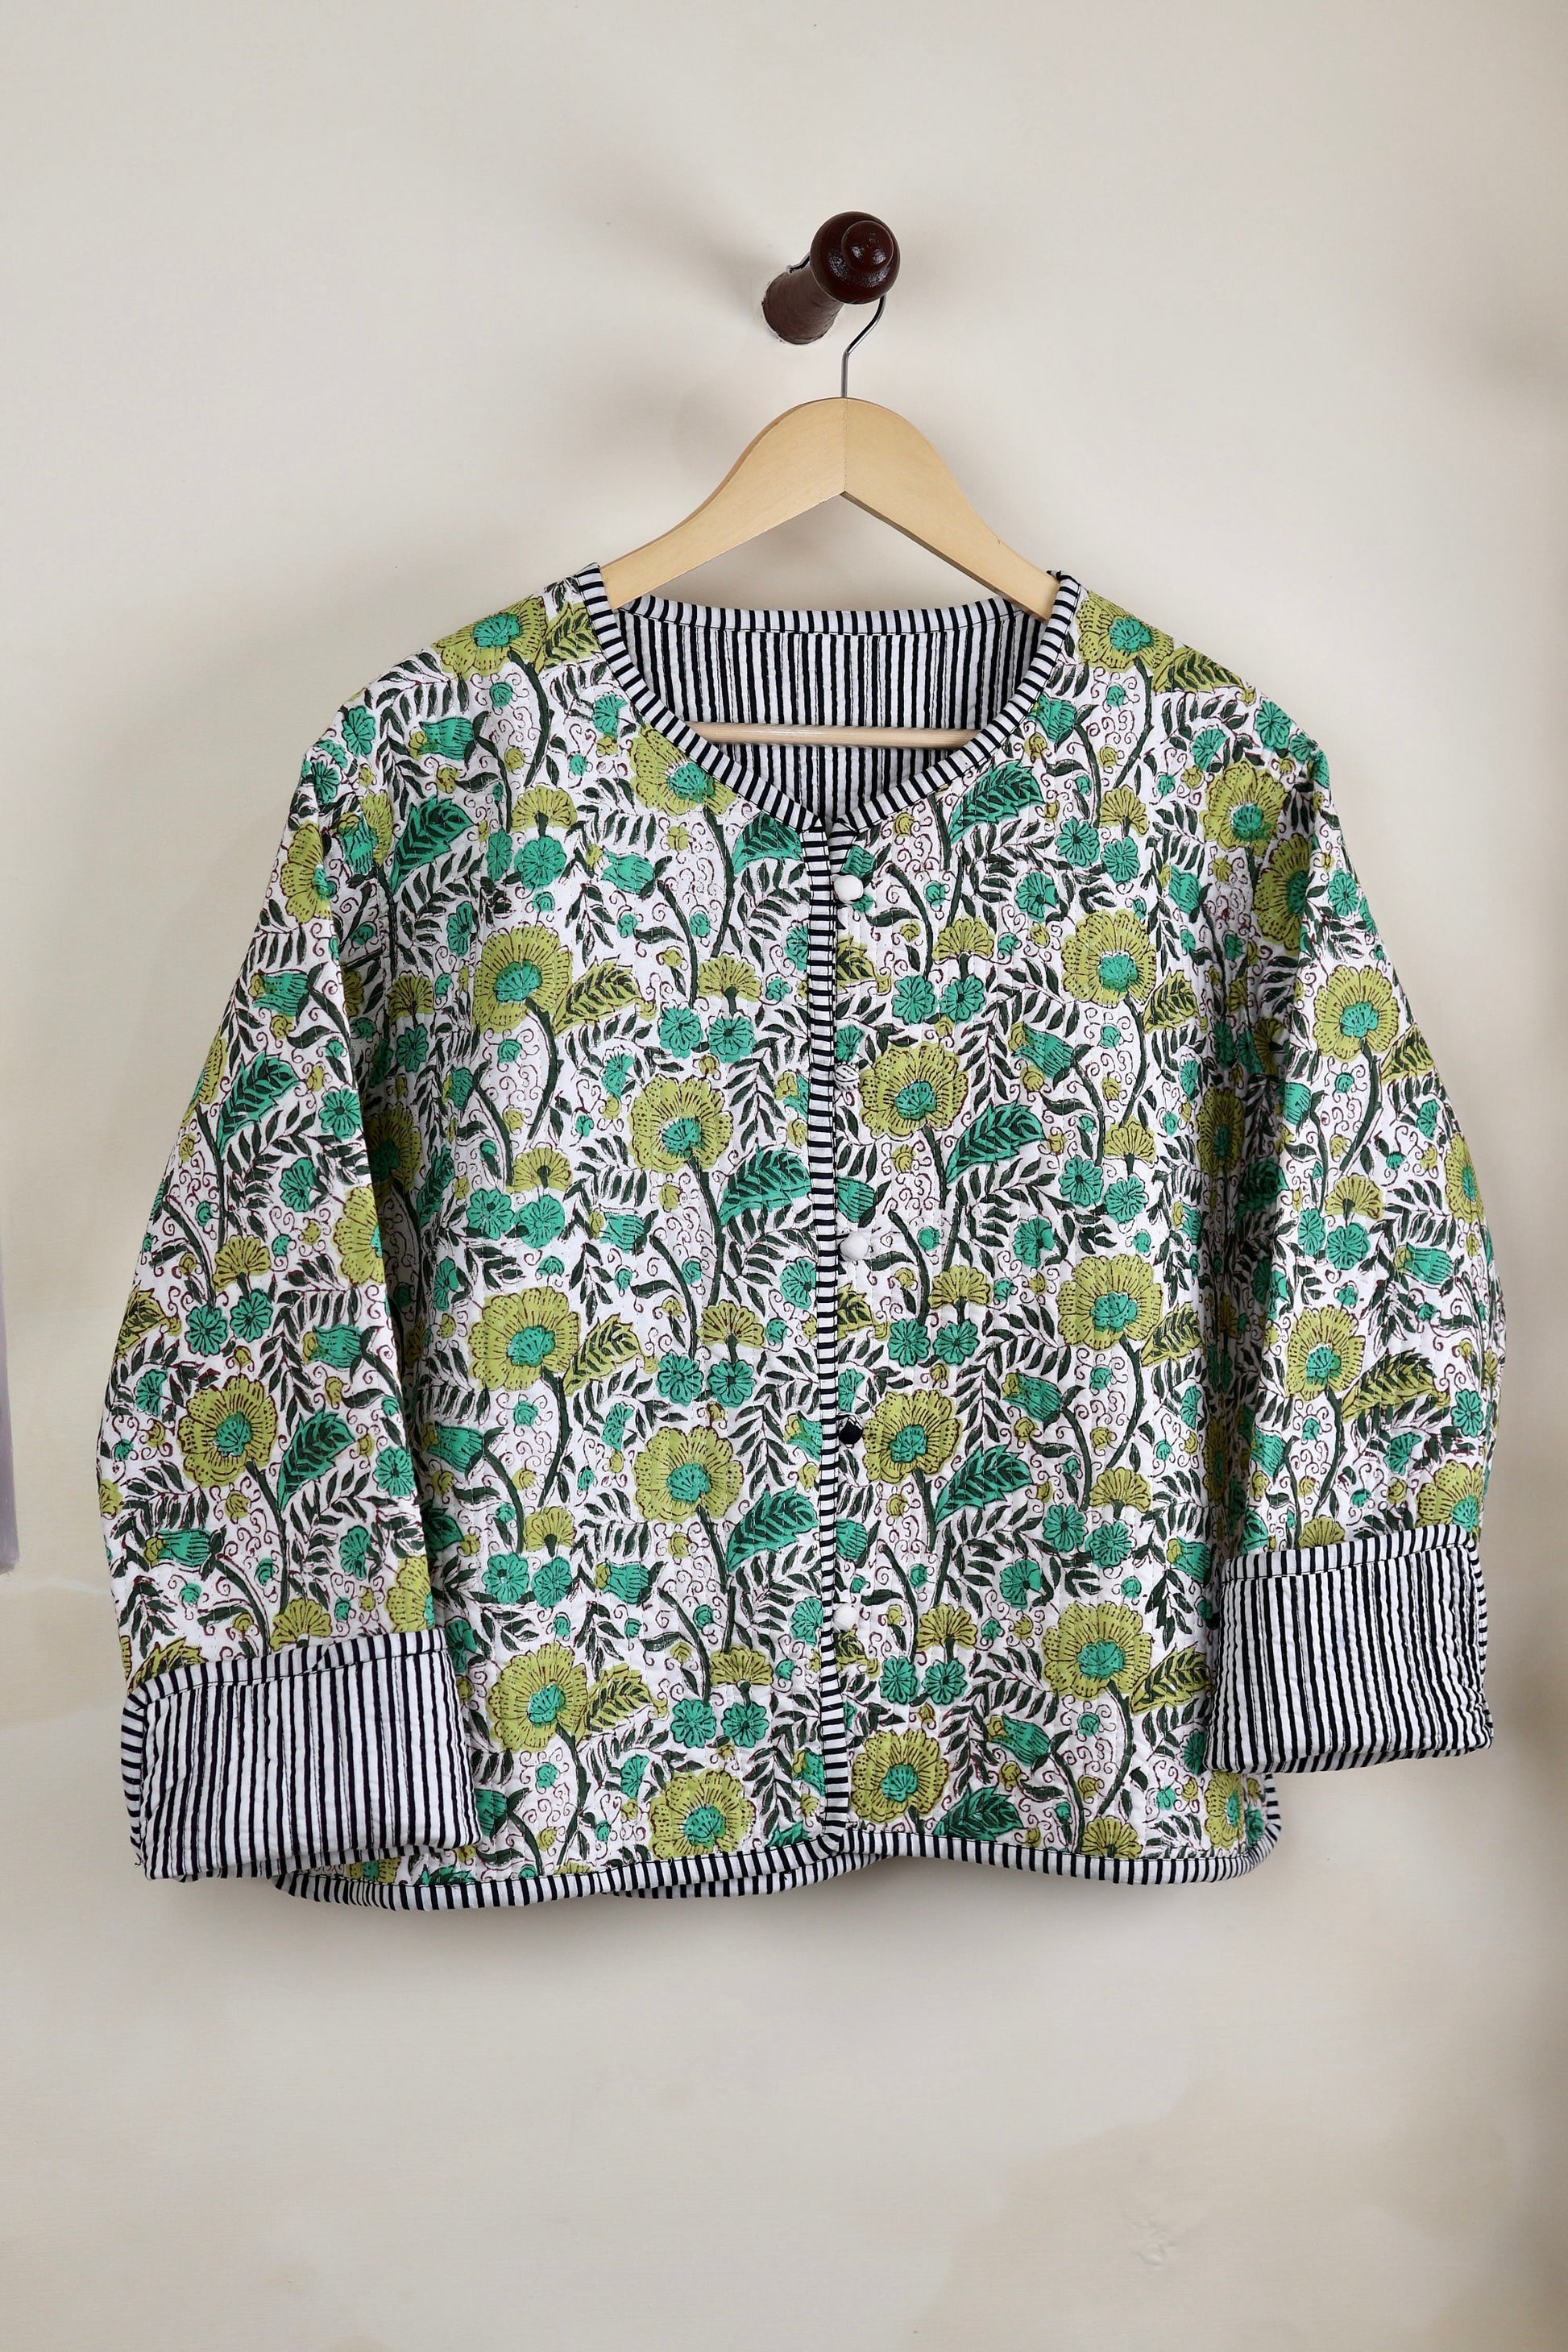 HandBlock Printed Quilted Cotton Jackets | White & Green Floral Women's Coat | Reversible Bohemian Style Indian Handmade Quilted Jackets